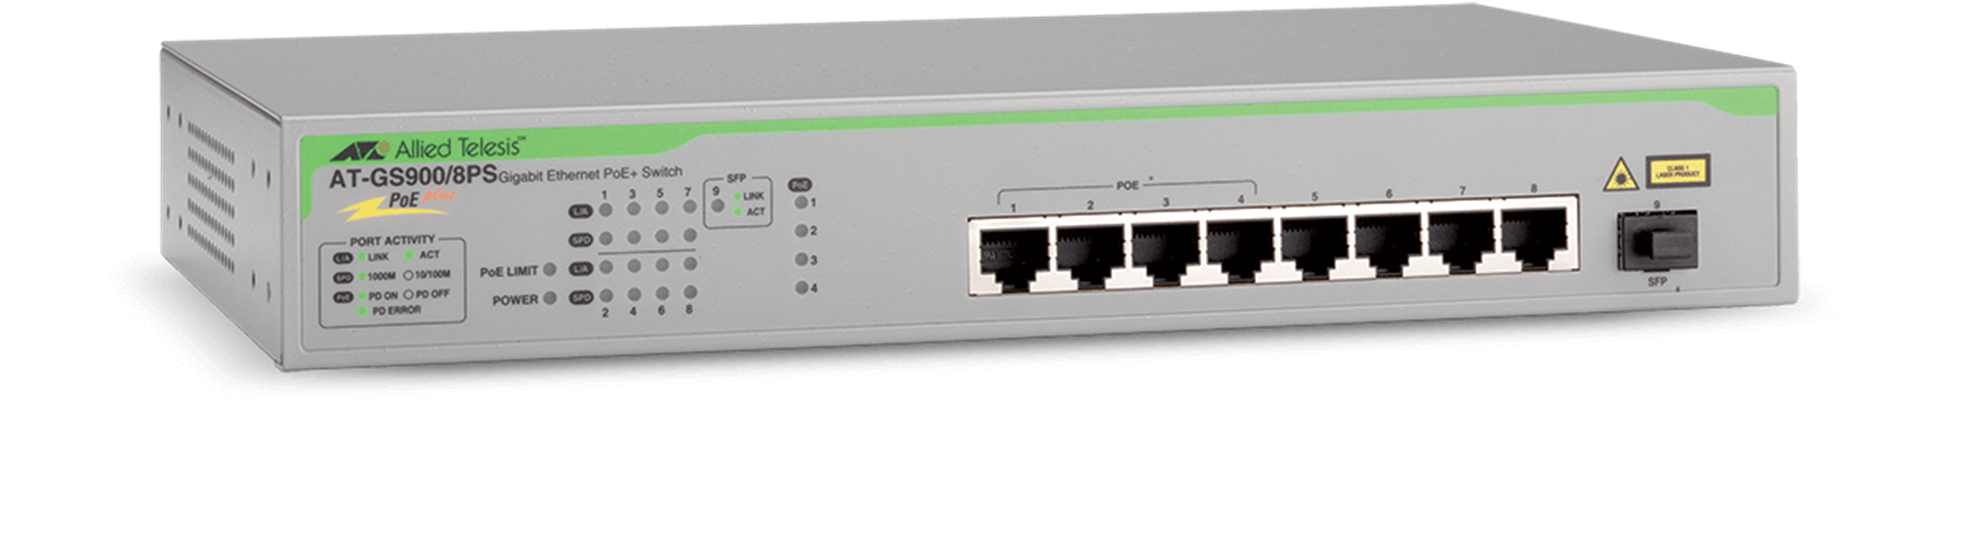 AT-GS900 Series - Unmanaged Gigabit Switch